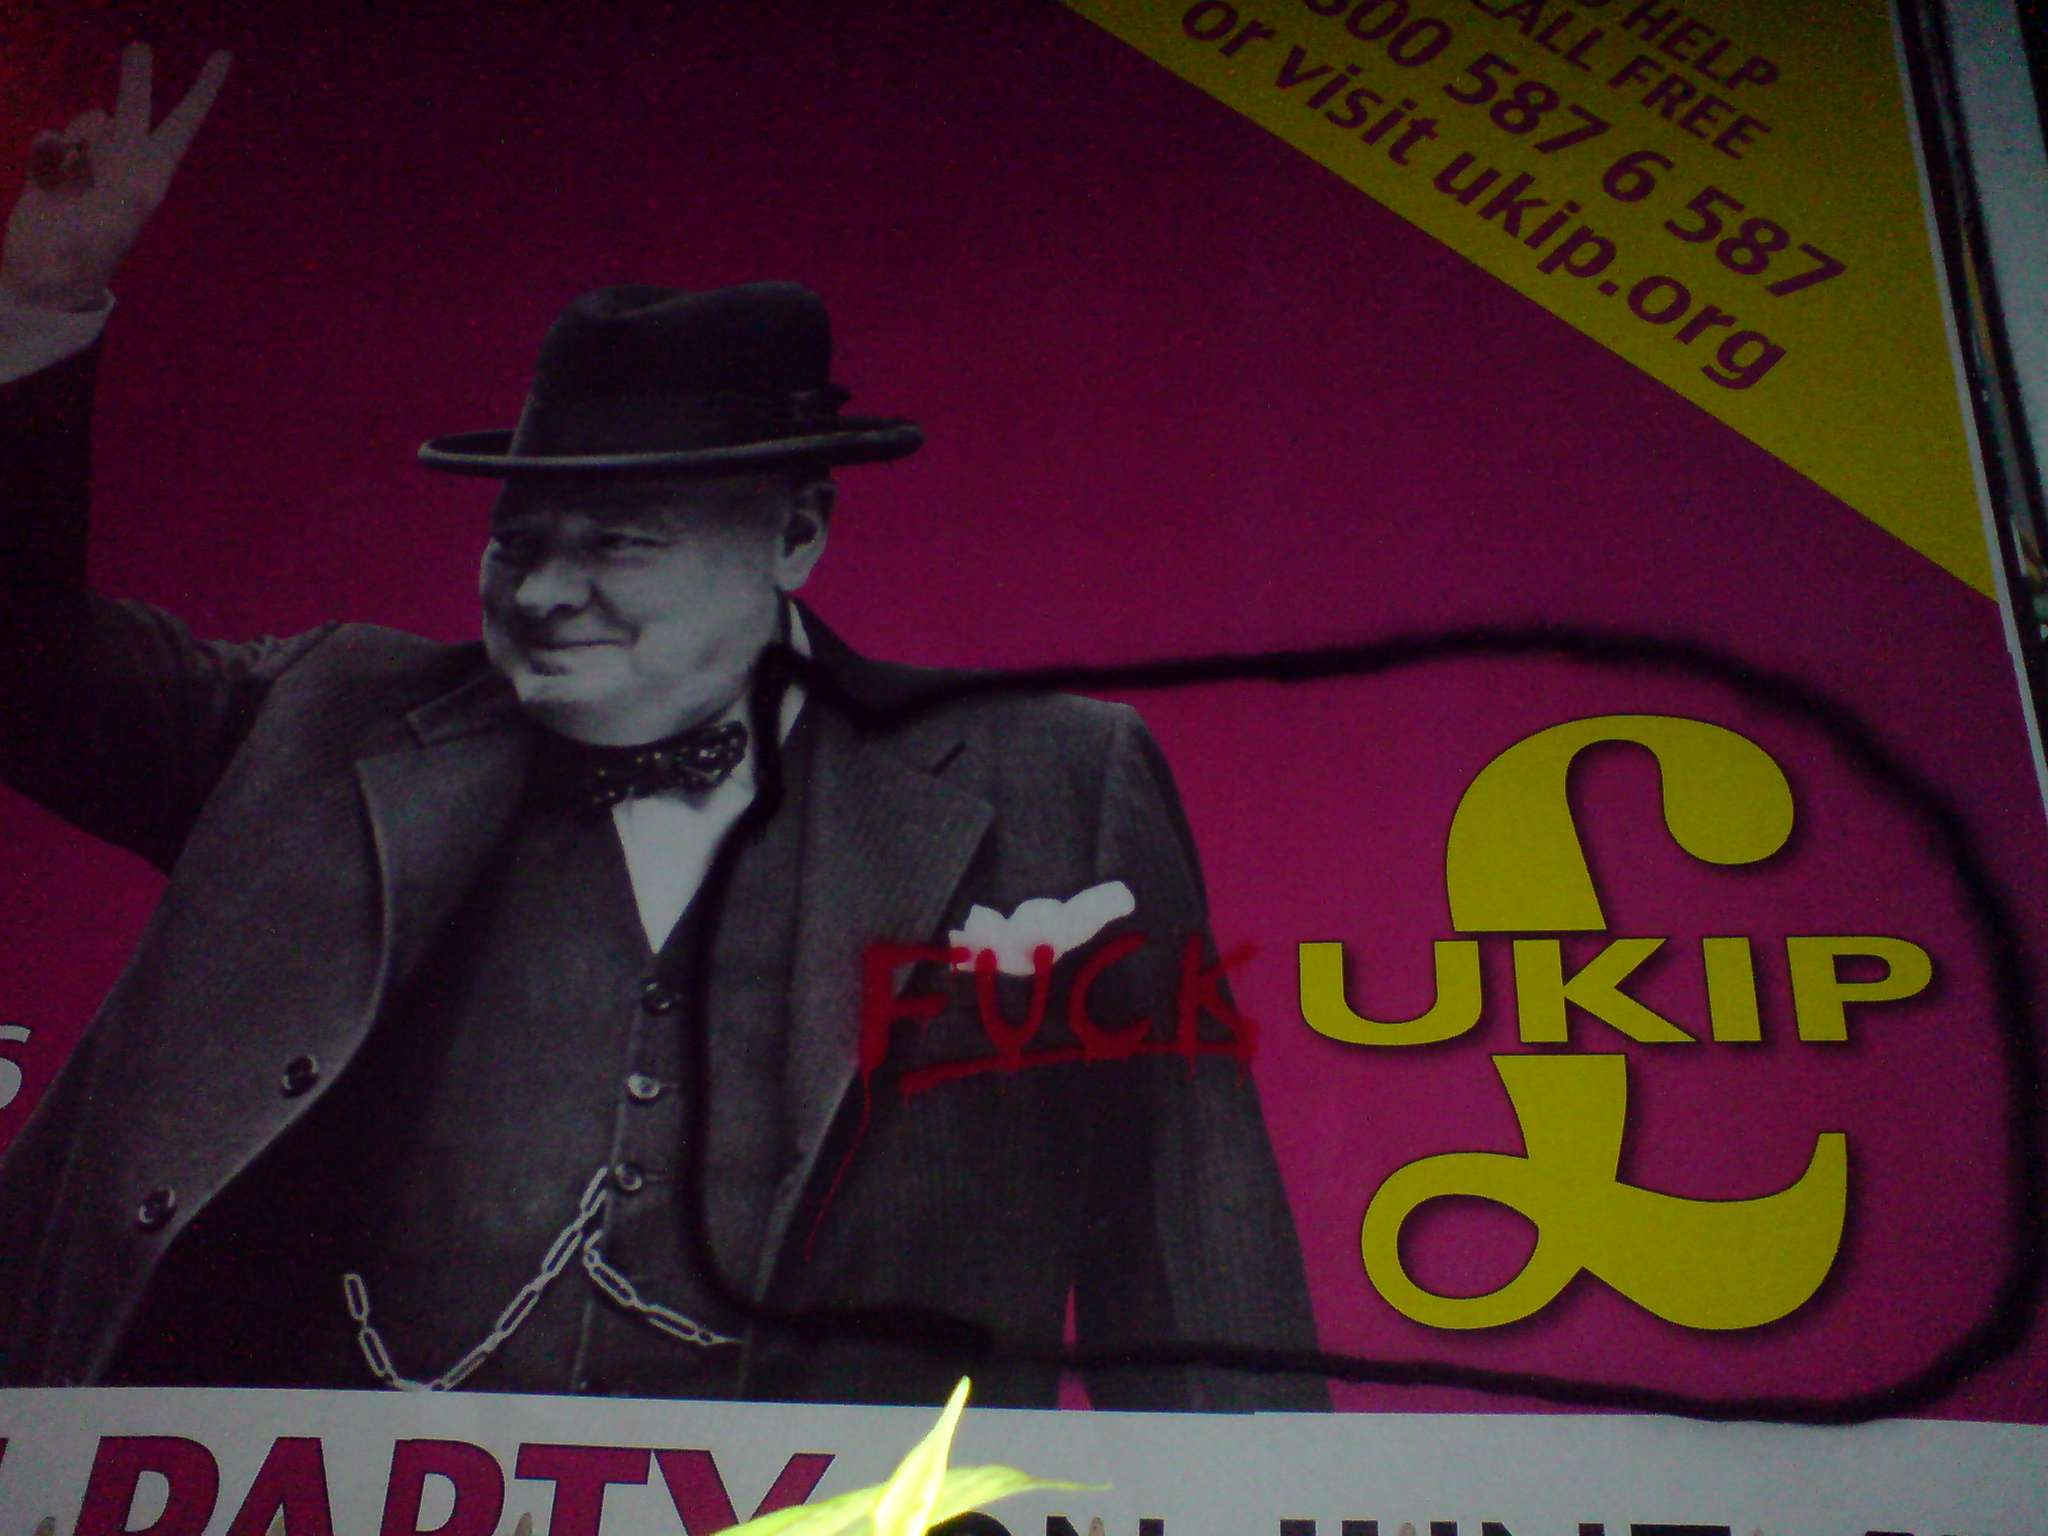 Churchill vents his frustration at being exploited by UKIP